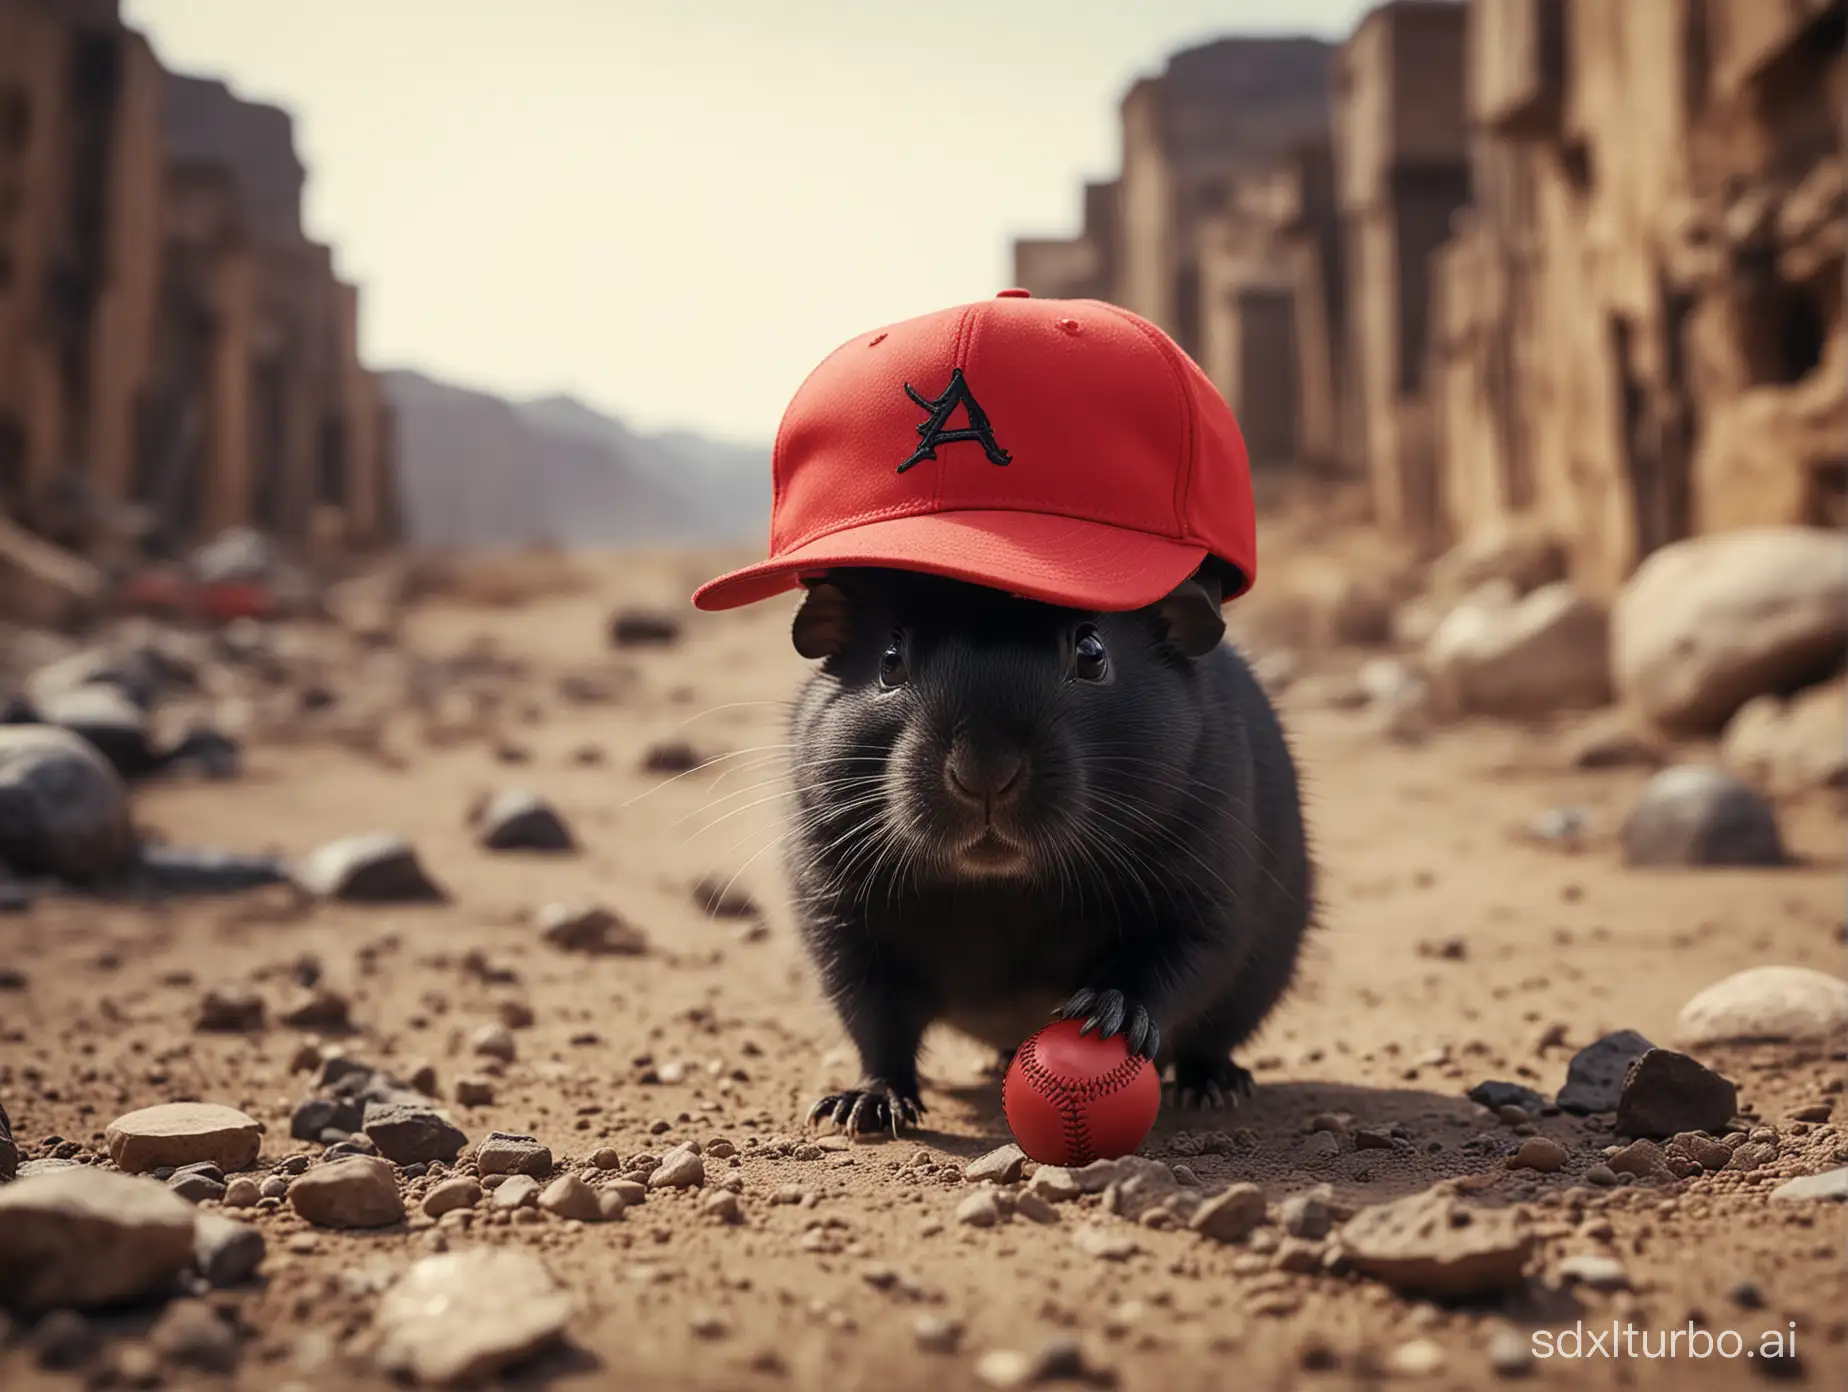 Epic-Black-Adult-Gerbil-Jumping-in-Wastelands-with-Red-Baseball-Cap